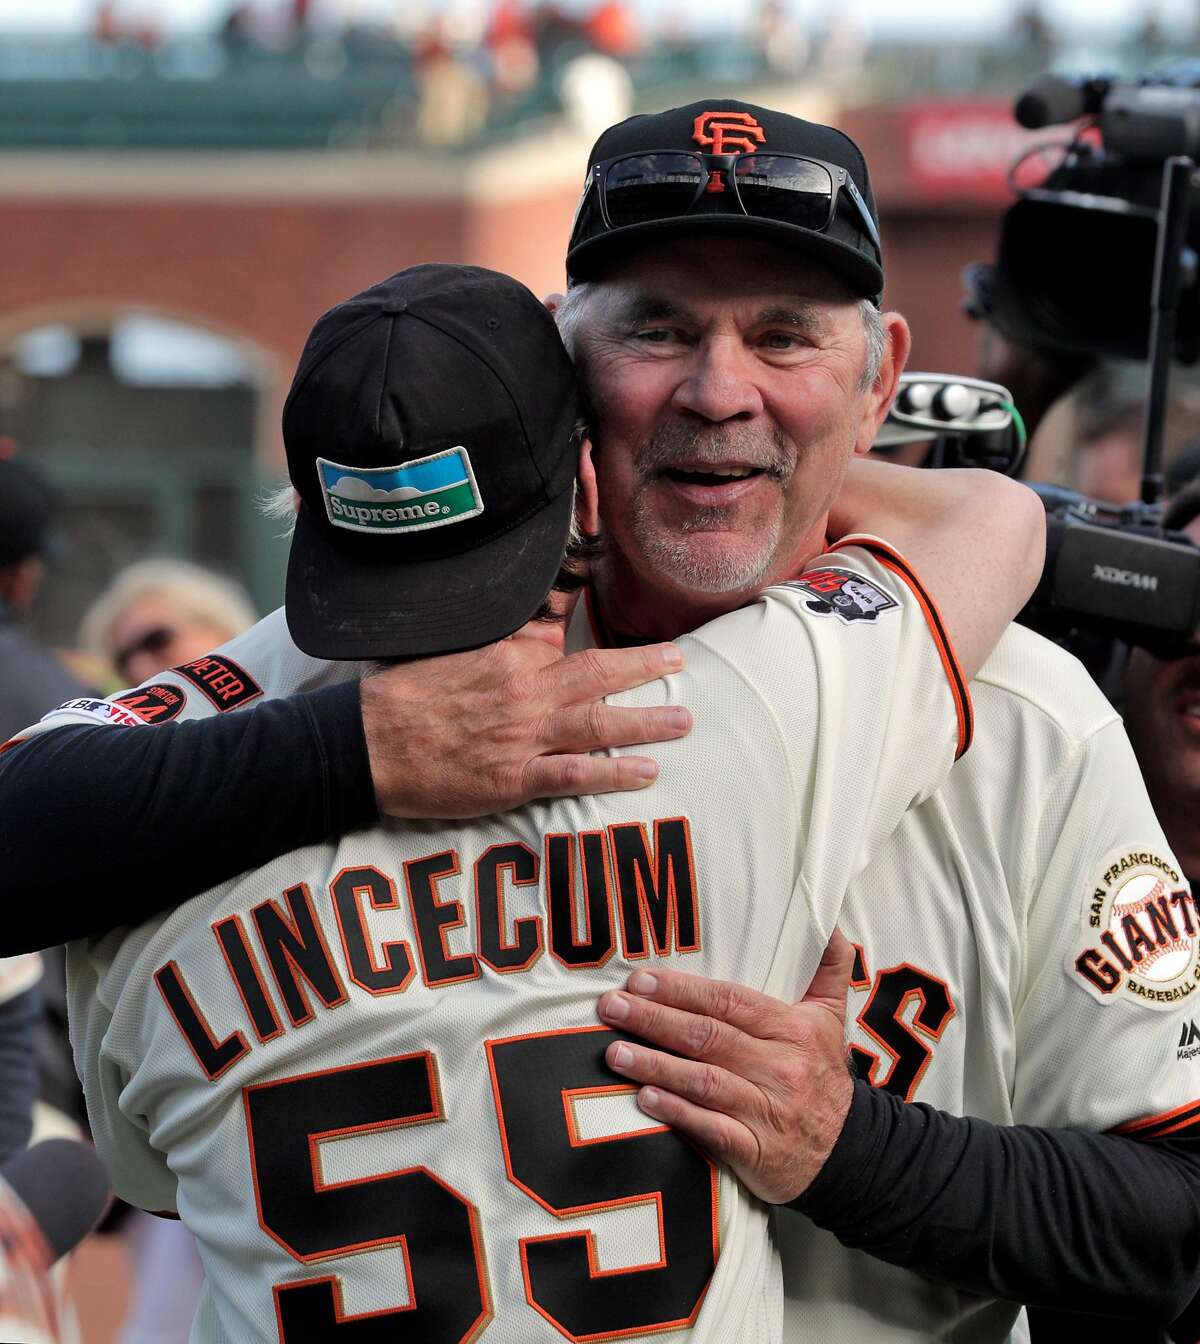 Giants manager Bruce Bochy hugs Tim Lincecum followning an onfield ceremony honoring Bochy after managed his final game with the San Francisco Giants at Oracle Park in San Francisco, Calif., on Sunday, September 29, 2019.